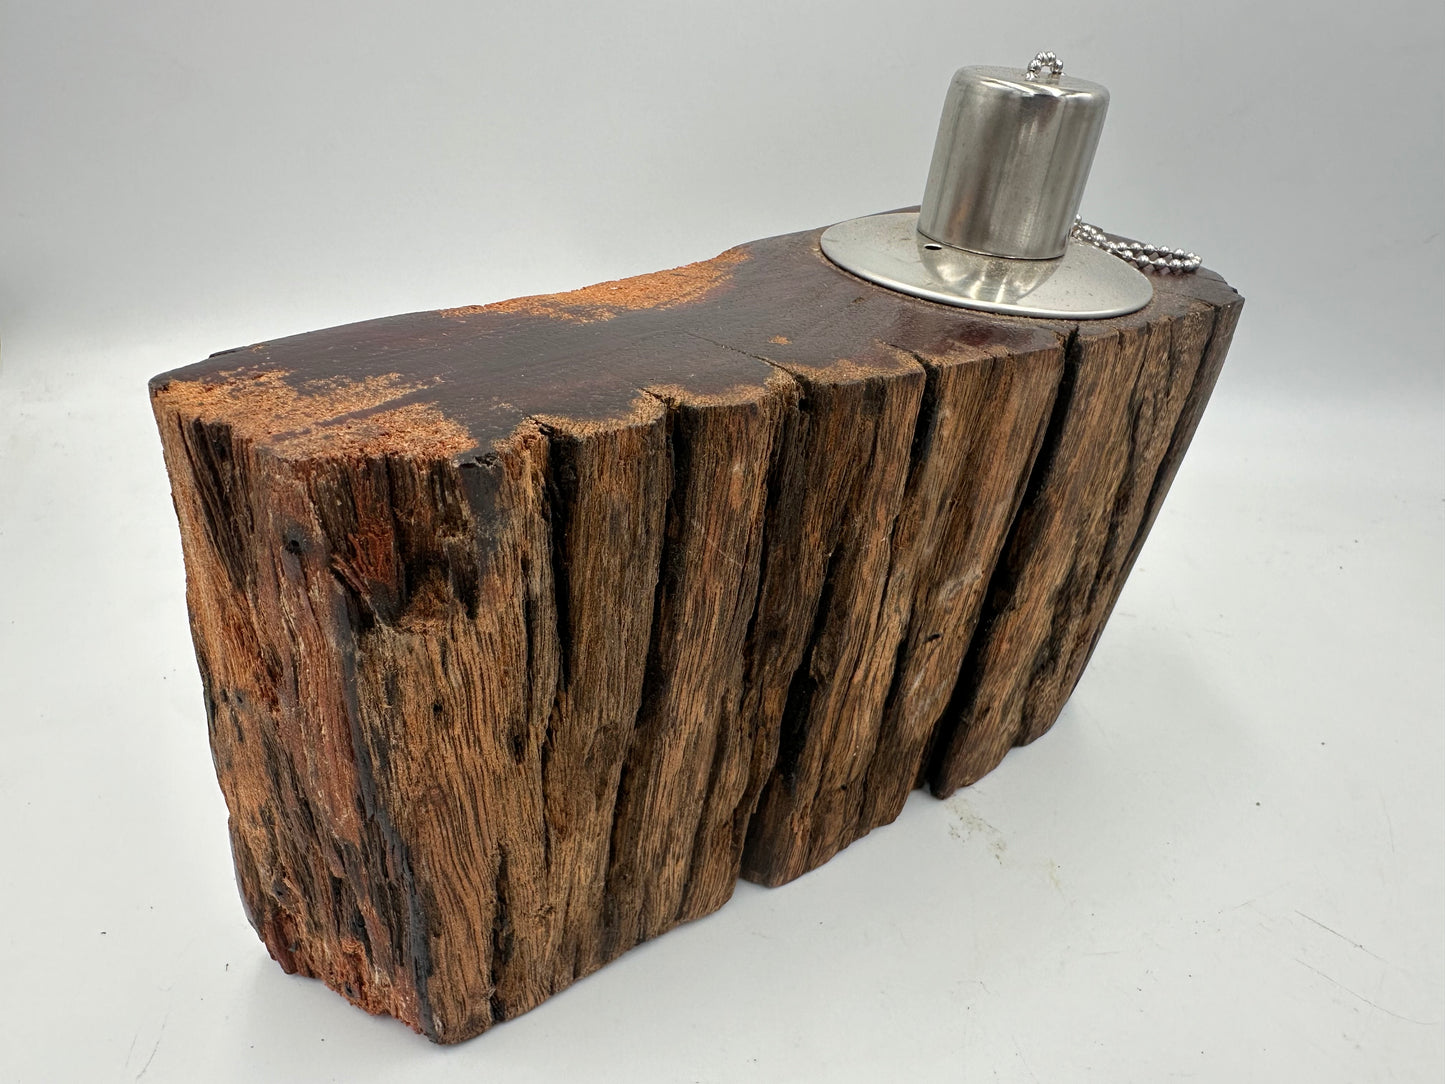 Recycled Wooden Oil Burner Large 58